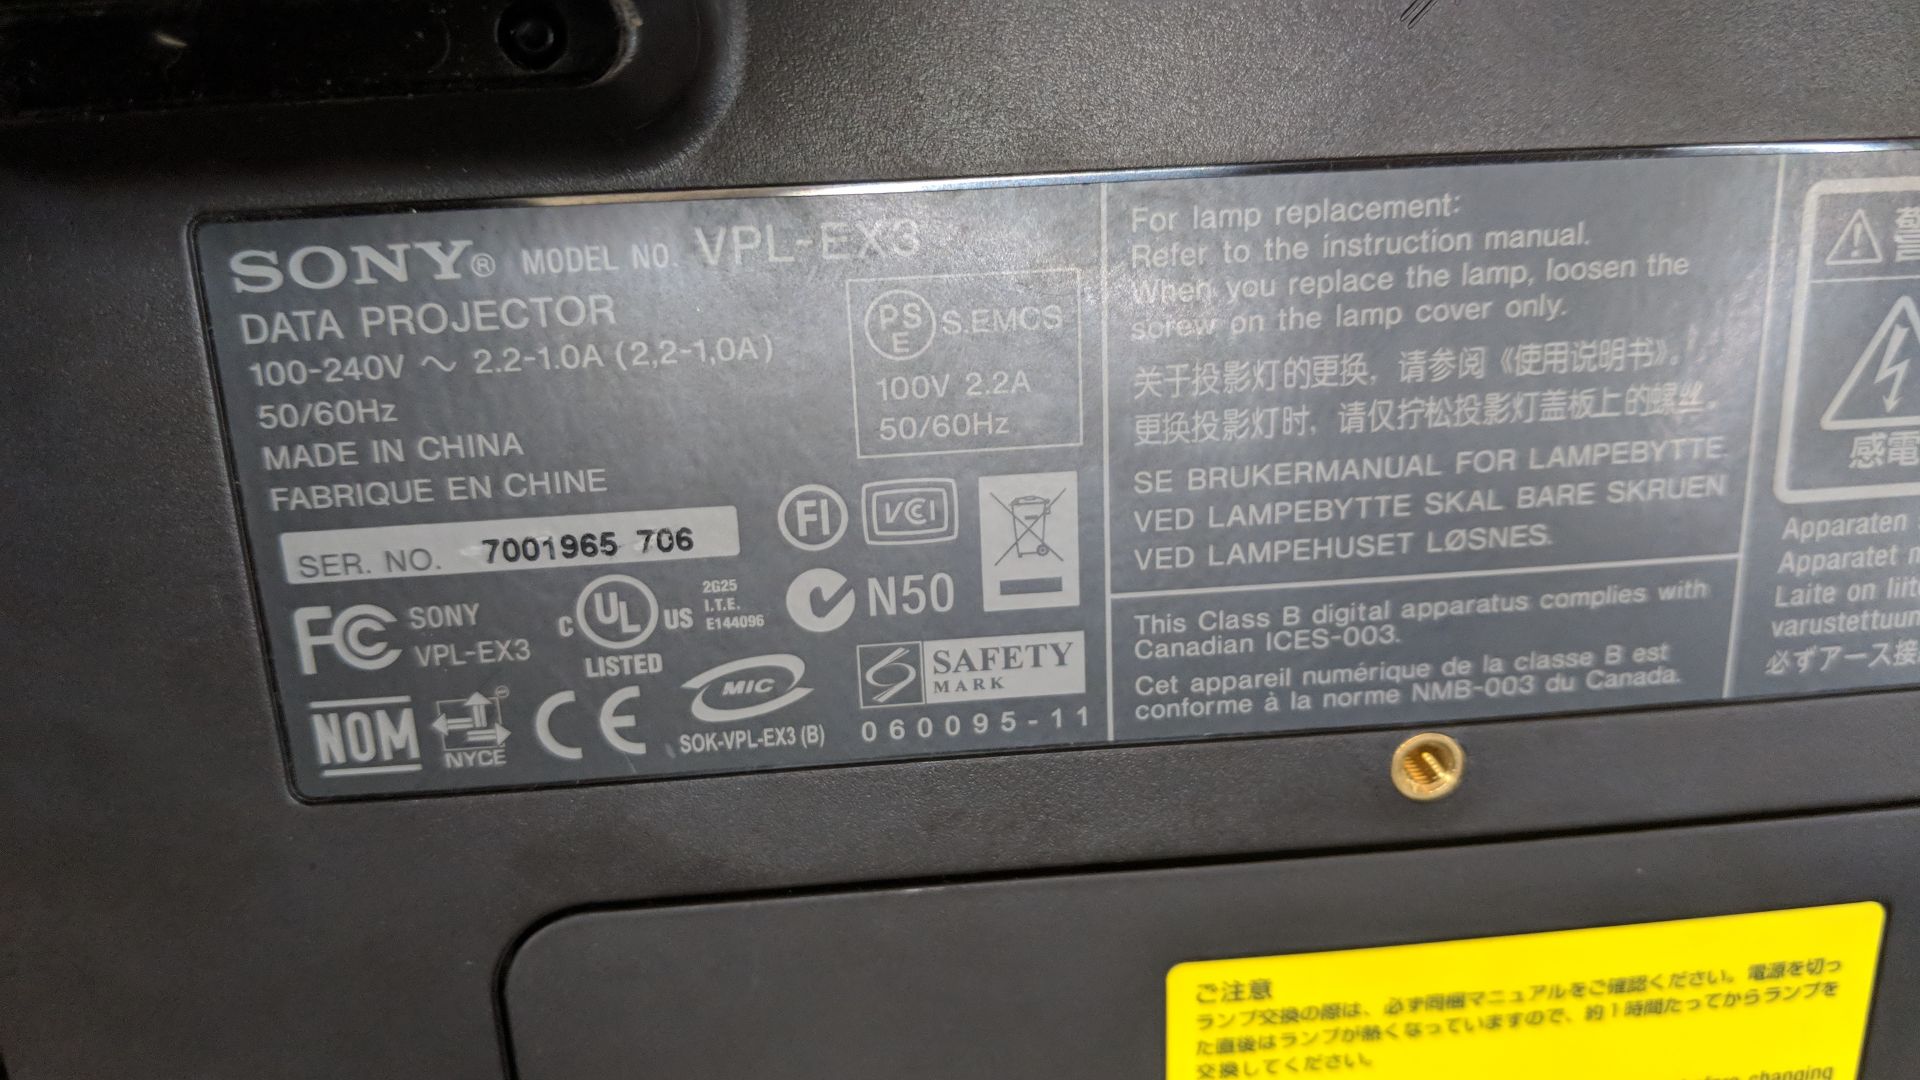 Sony model VPL-EX3 data projector IMPORTANT: Please remember goods successfully bid upon must be - Image 5 of 5